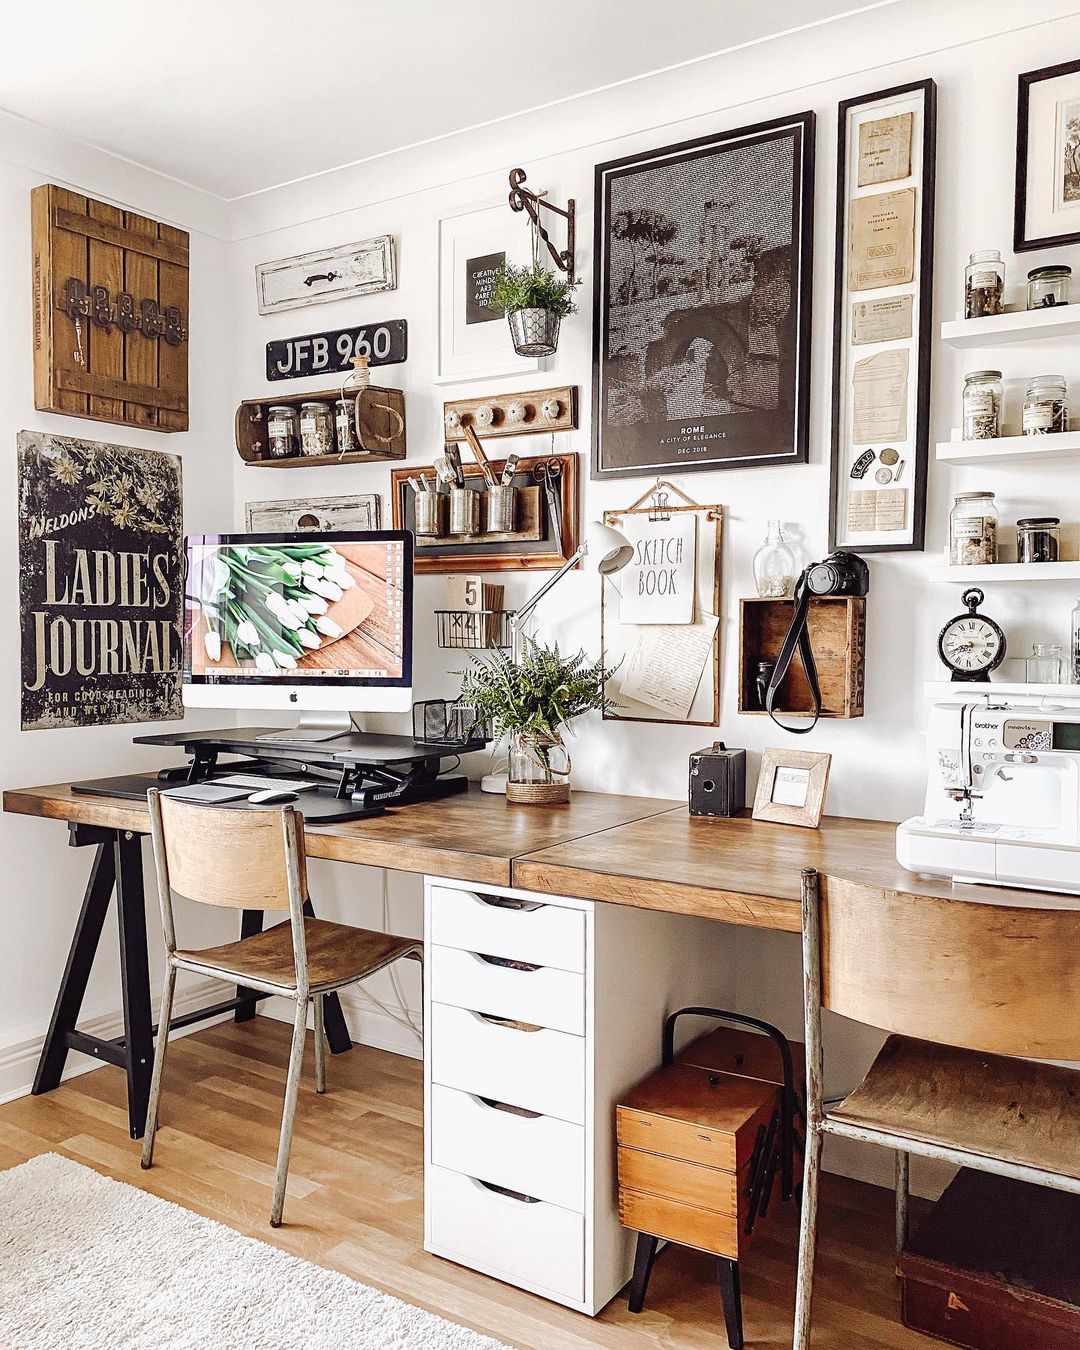 Mix Vintage Decor with Functional Pieces for a Rustic Office